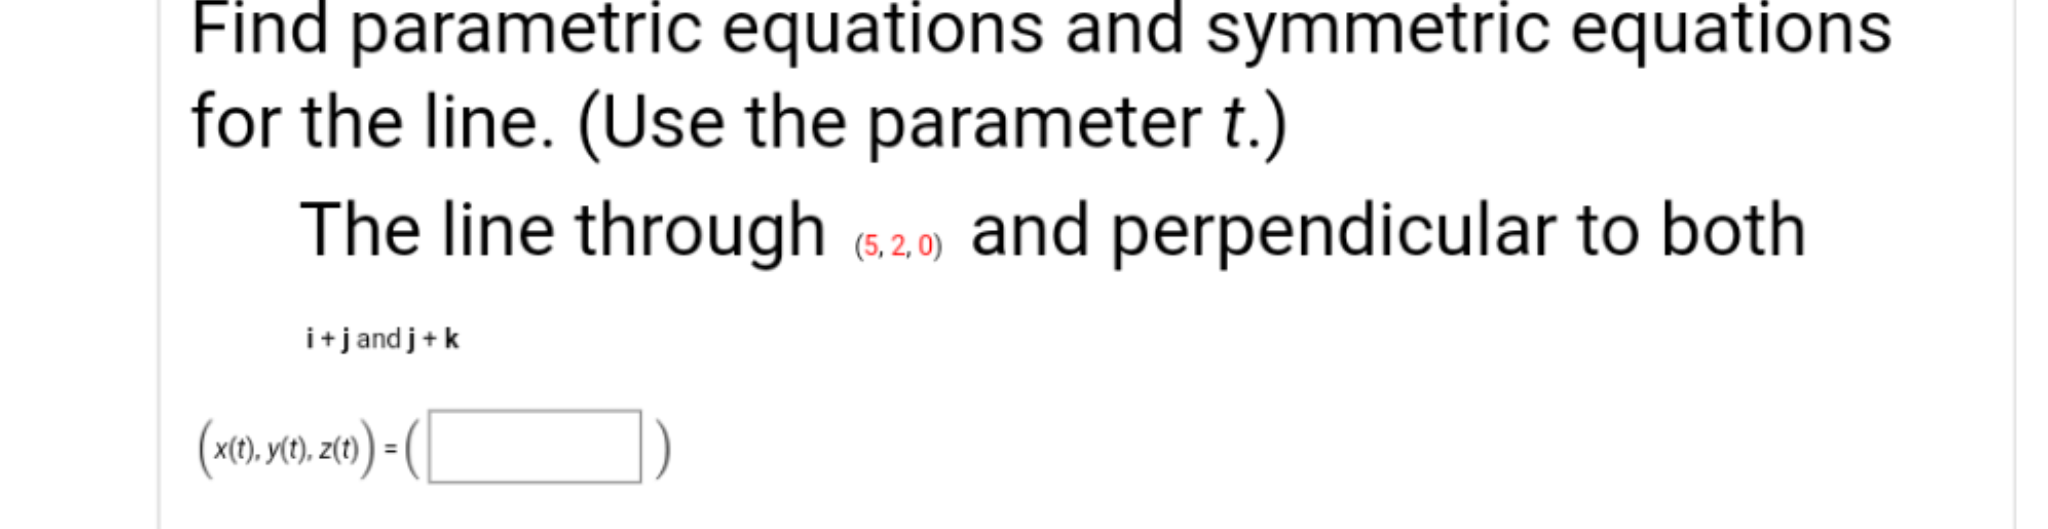 Find parametric equations and symmetric equations
for the line. (Use the parameter t.)
The line through (6.2.0) and perpendicular to both
i+jandj+k
